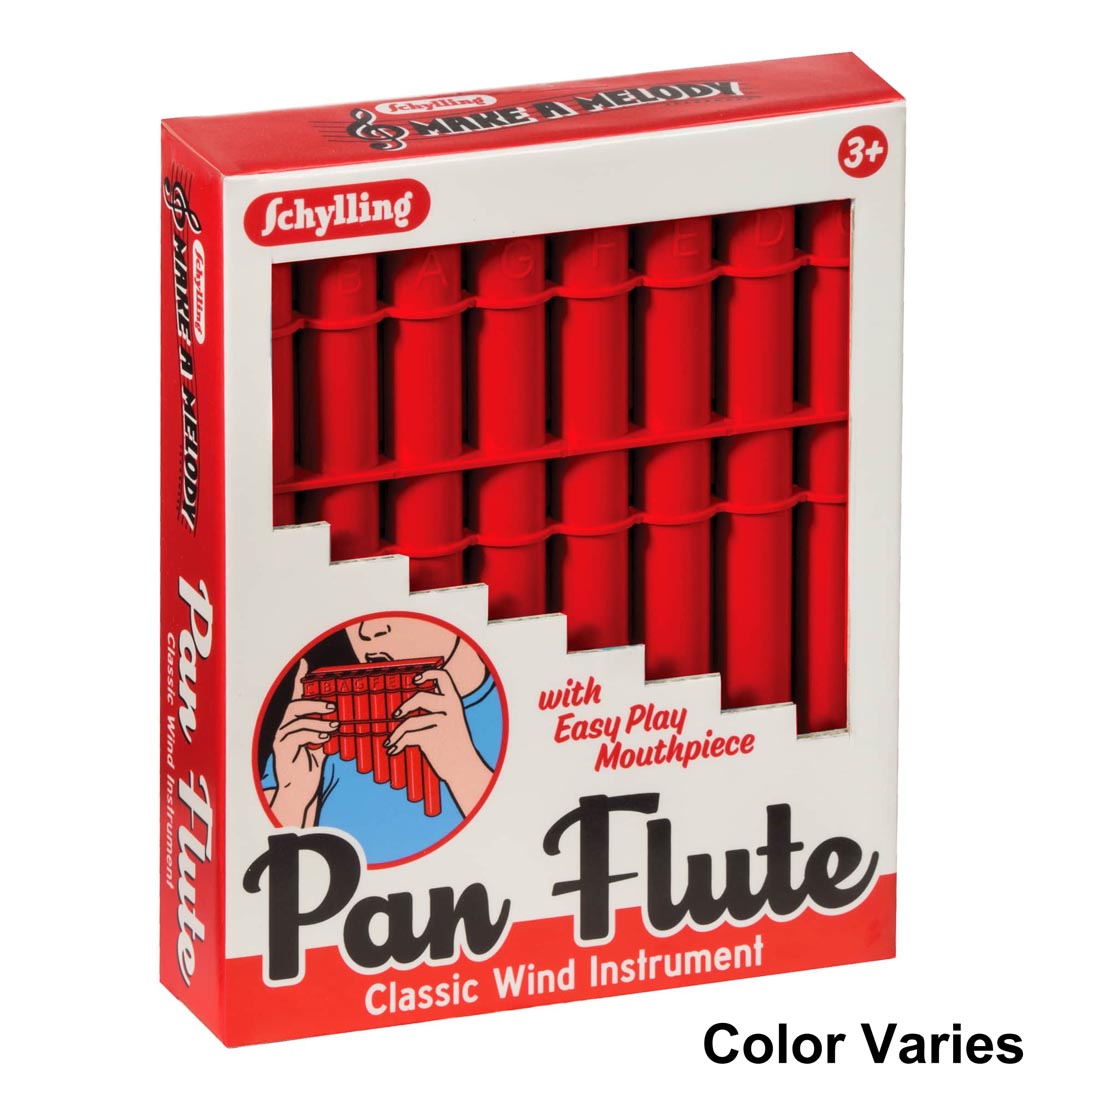 Pan Flute package and the text Color Varies